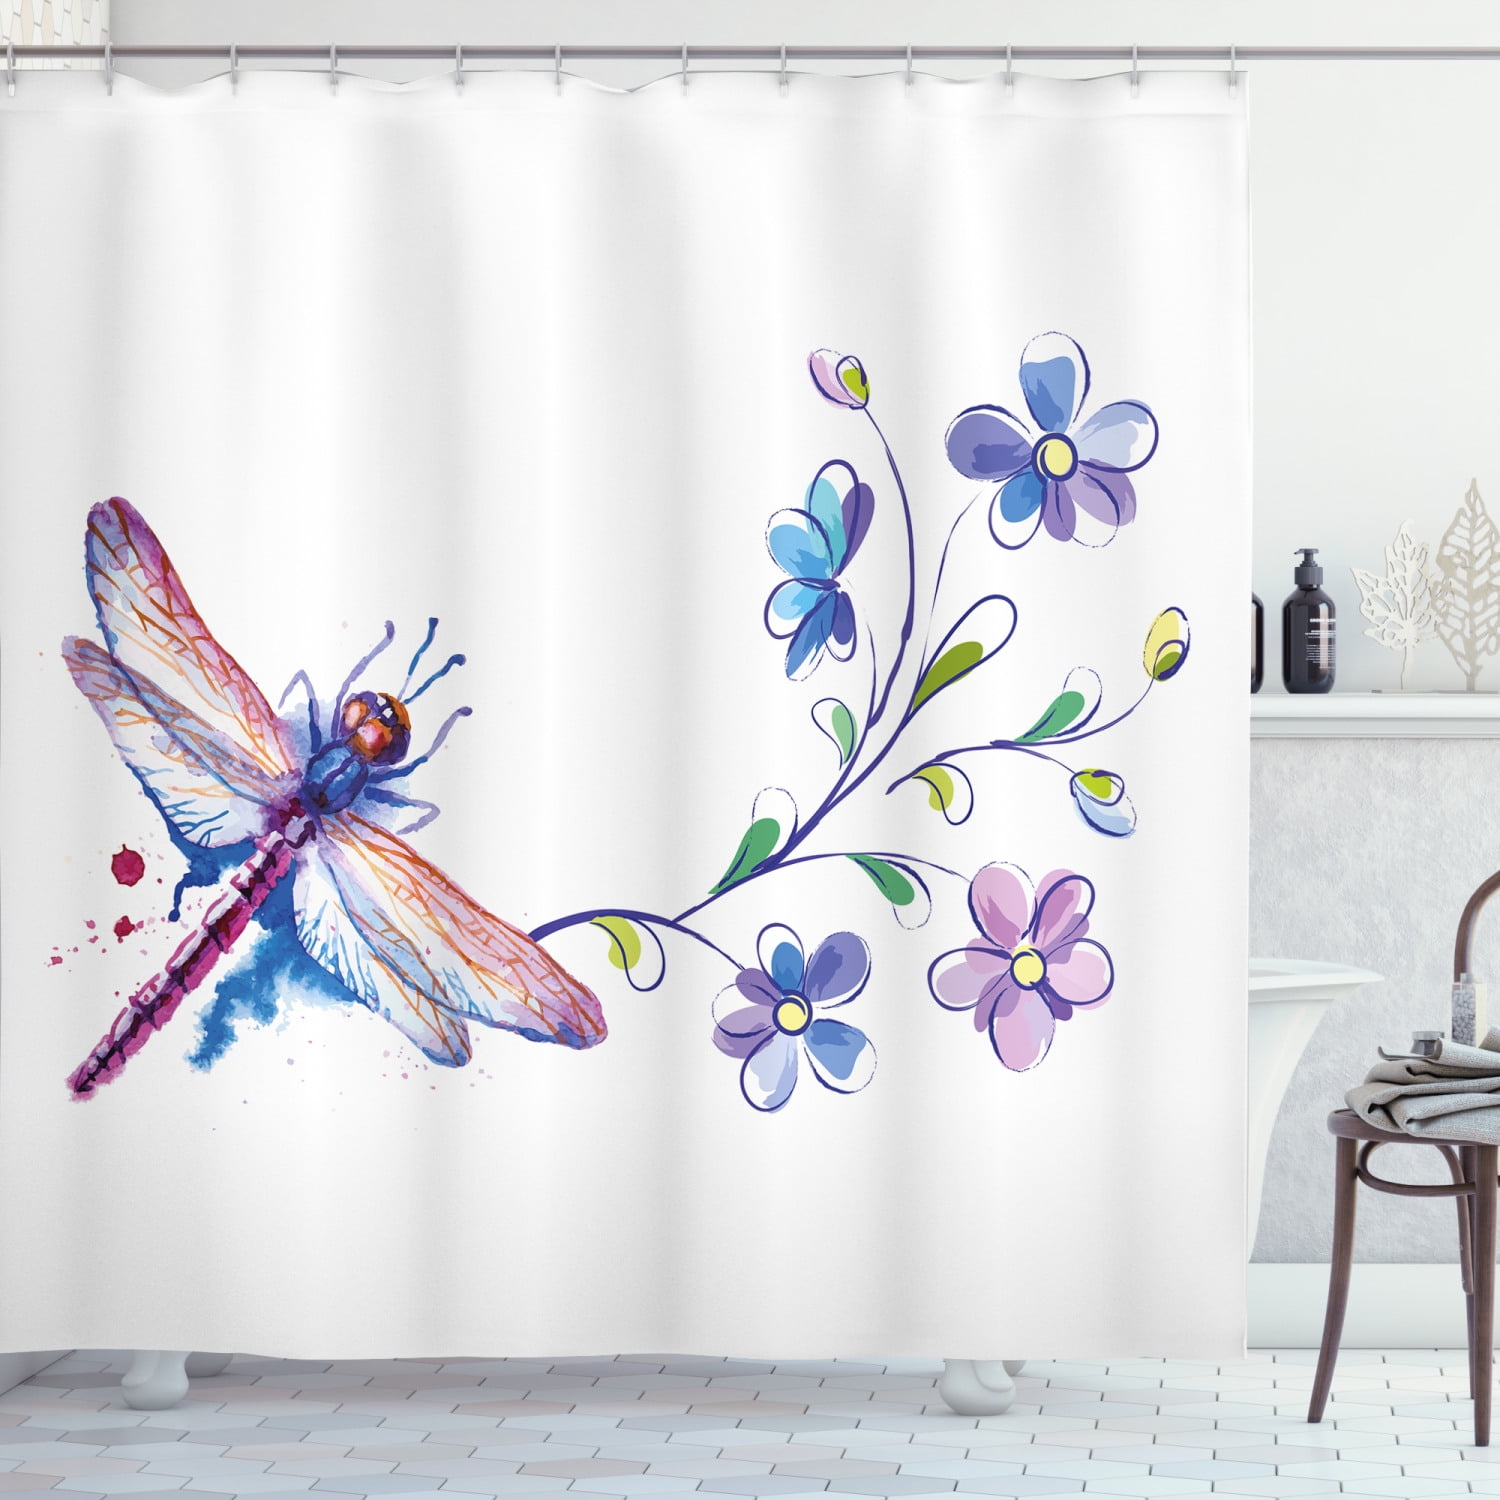 CafePress Dragonfly And Flowers Shower Curtain 1450645970 